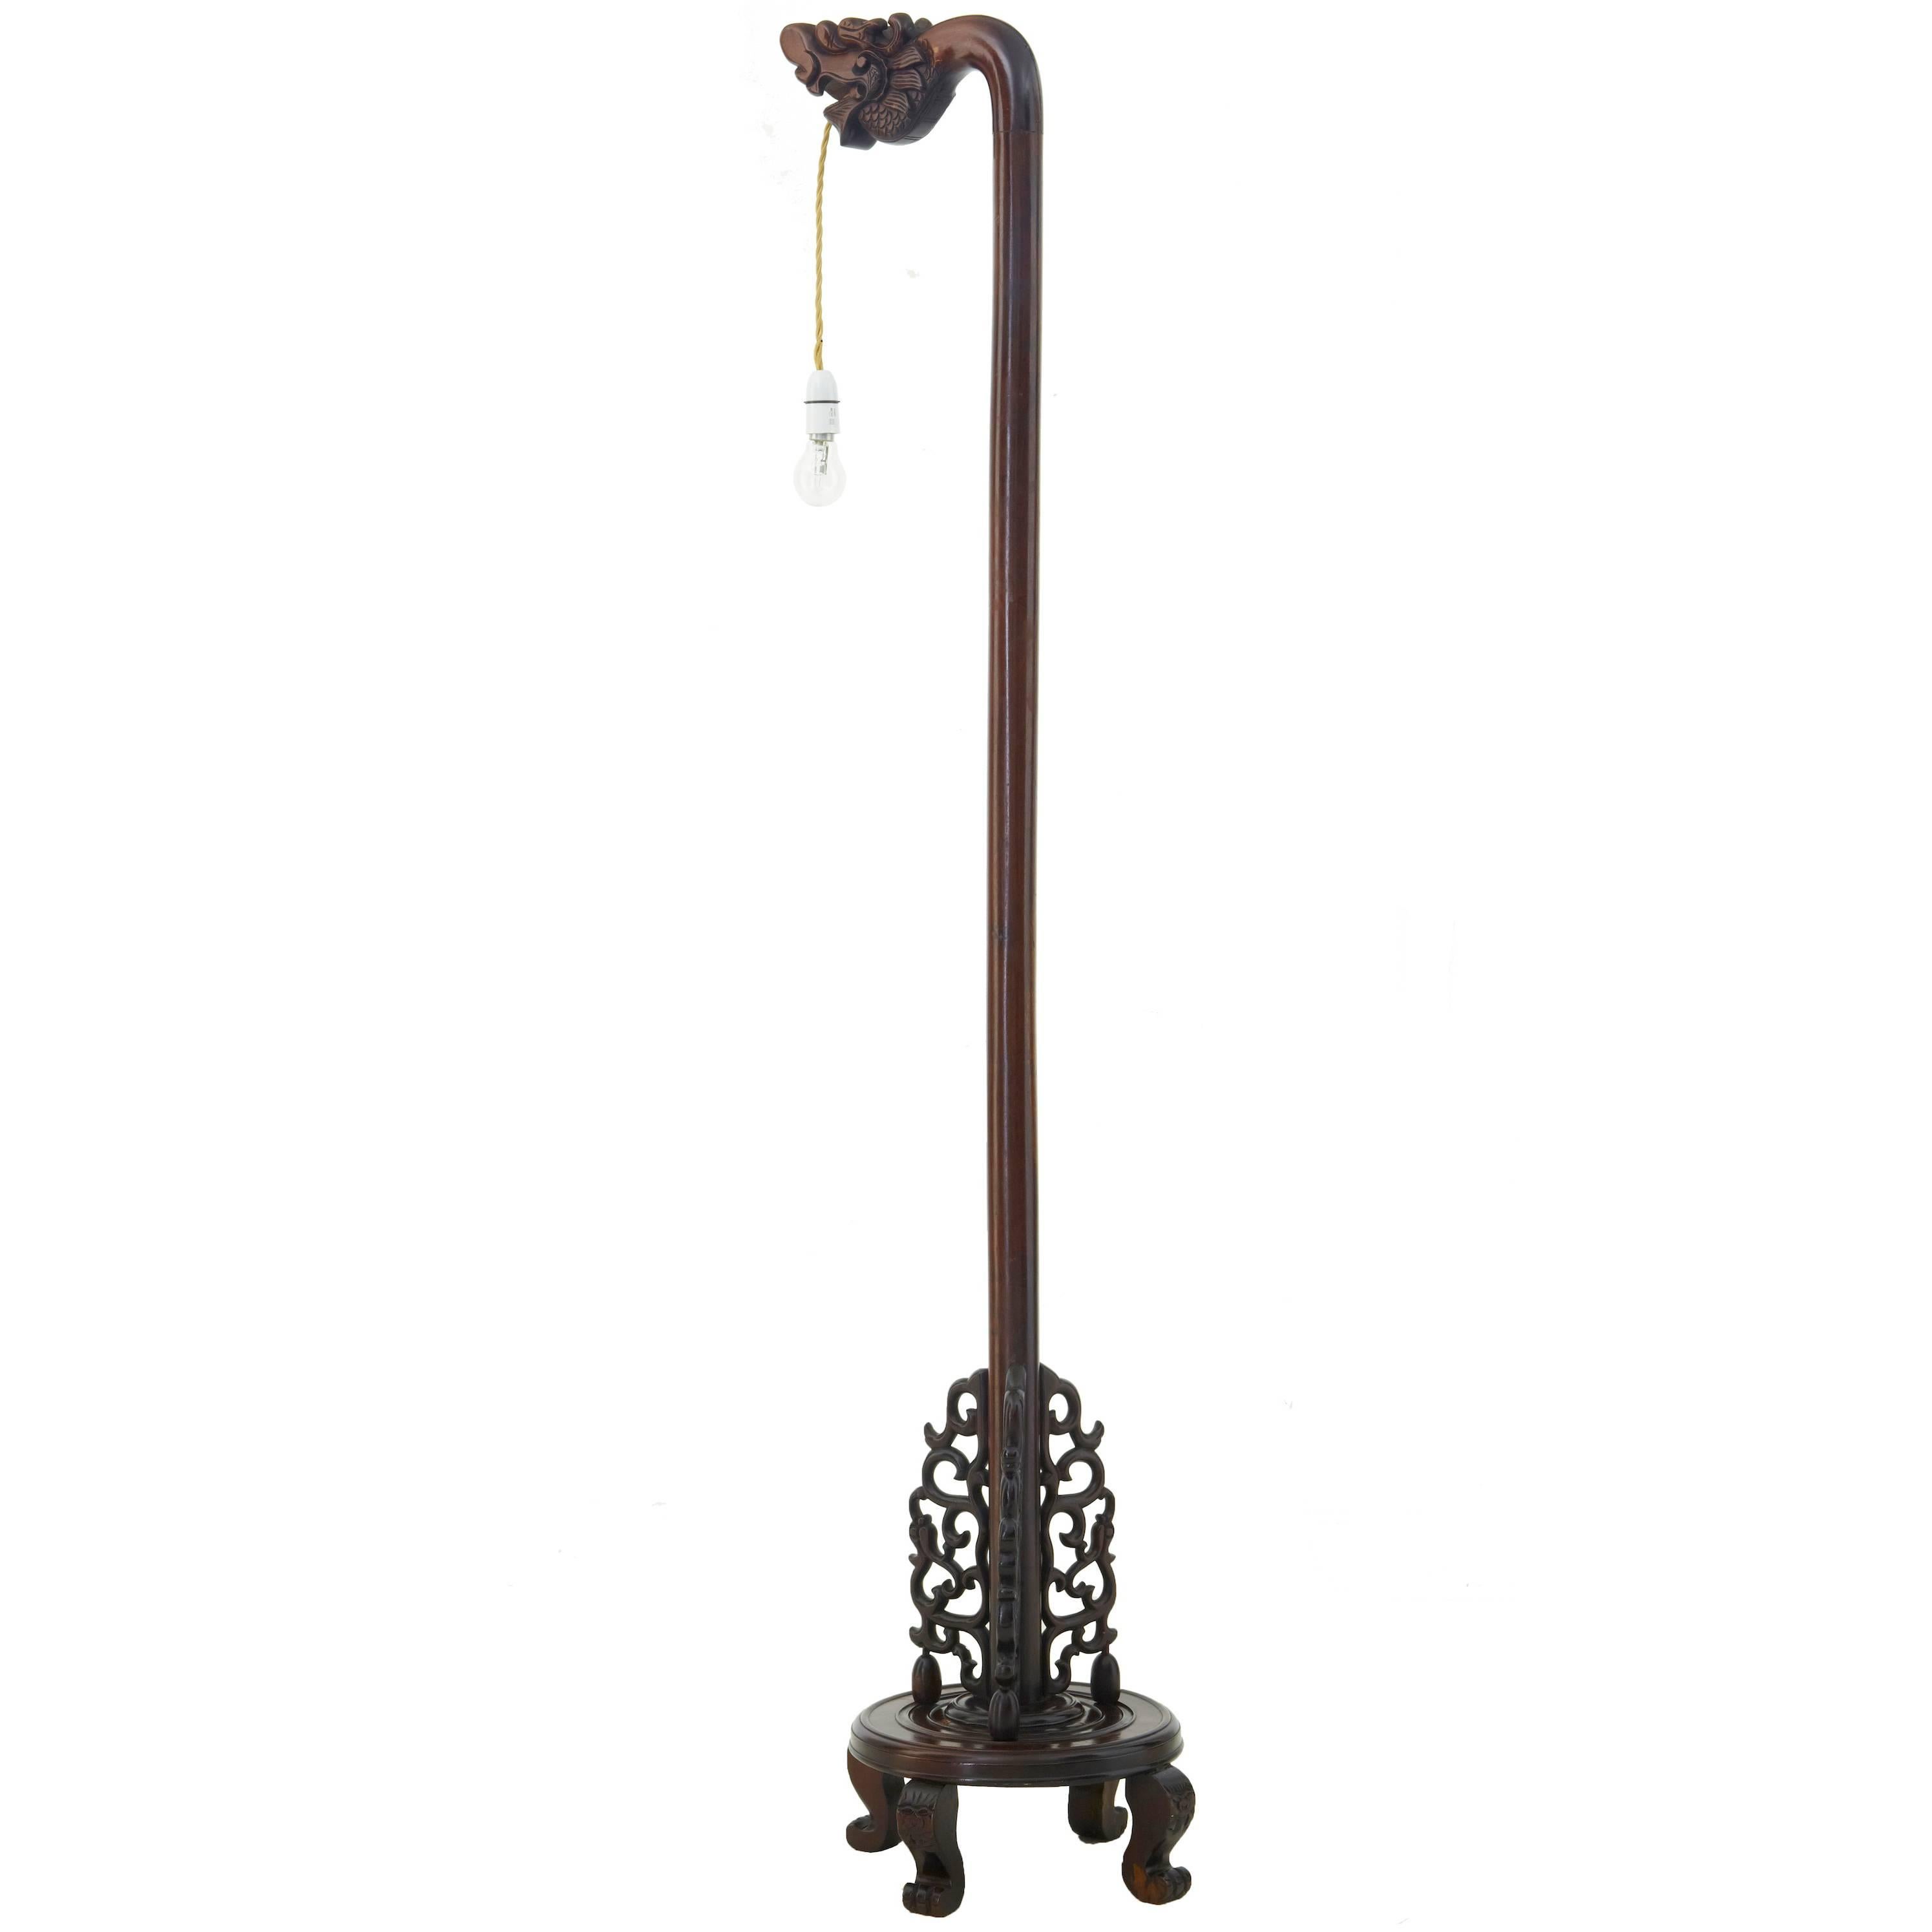 Decorative Chinese Carved Hard Wood Floor Lamp